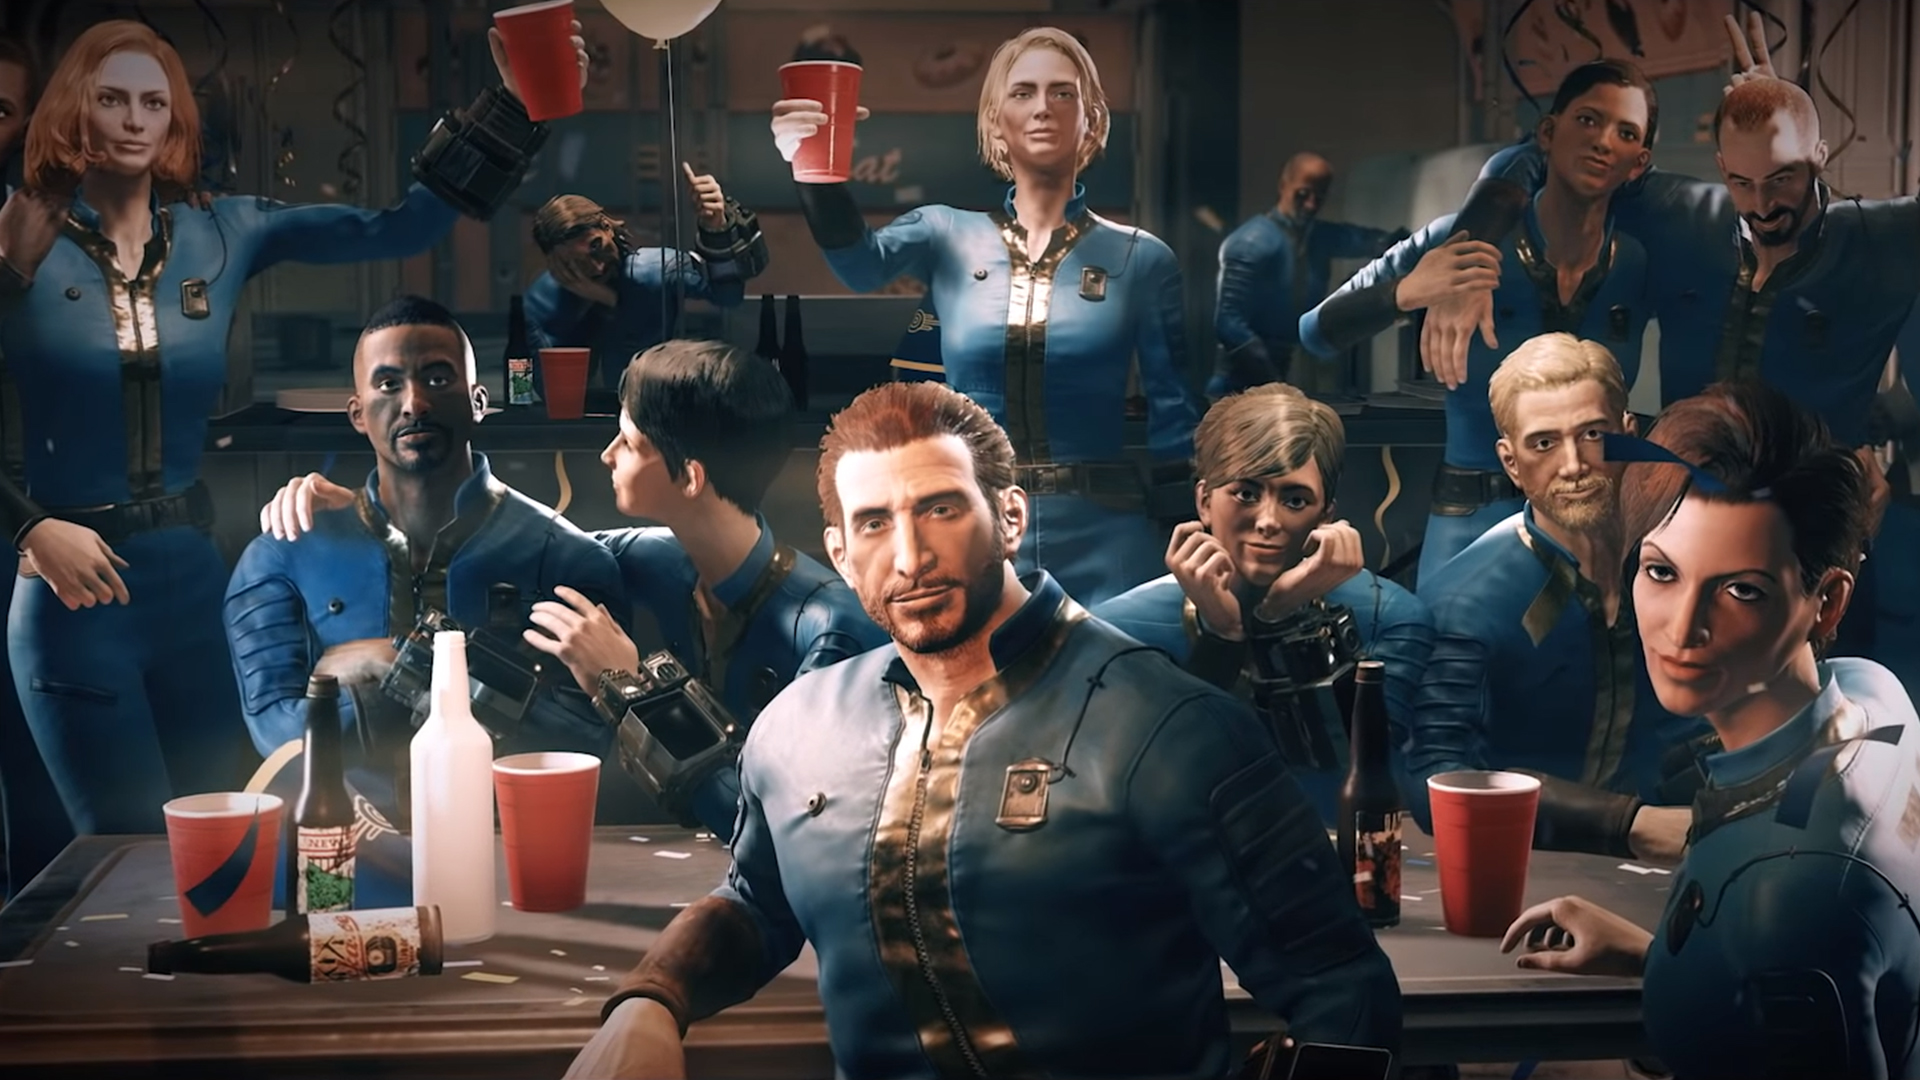 Ron Perlman tells us once again that “war never changes” in the Fallout 76 intro